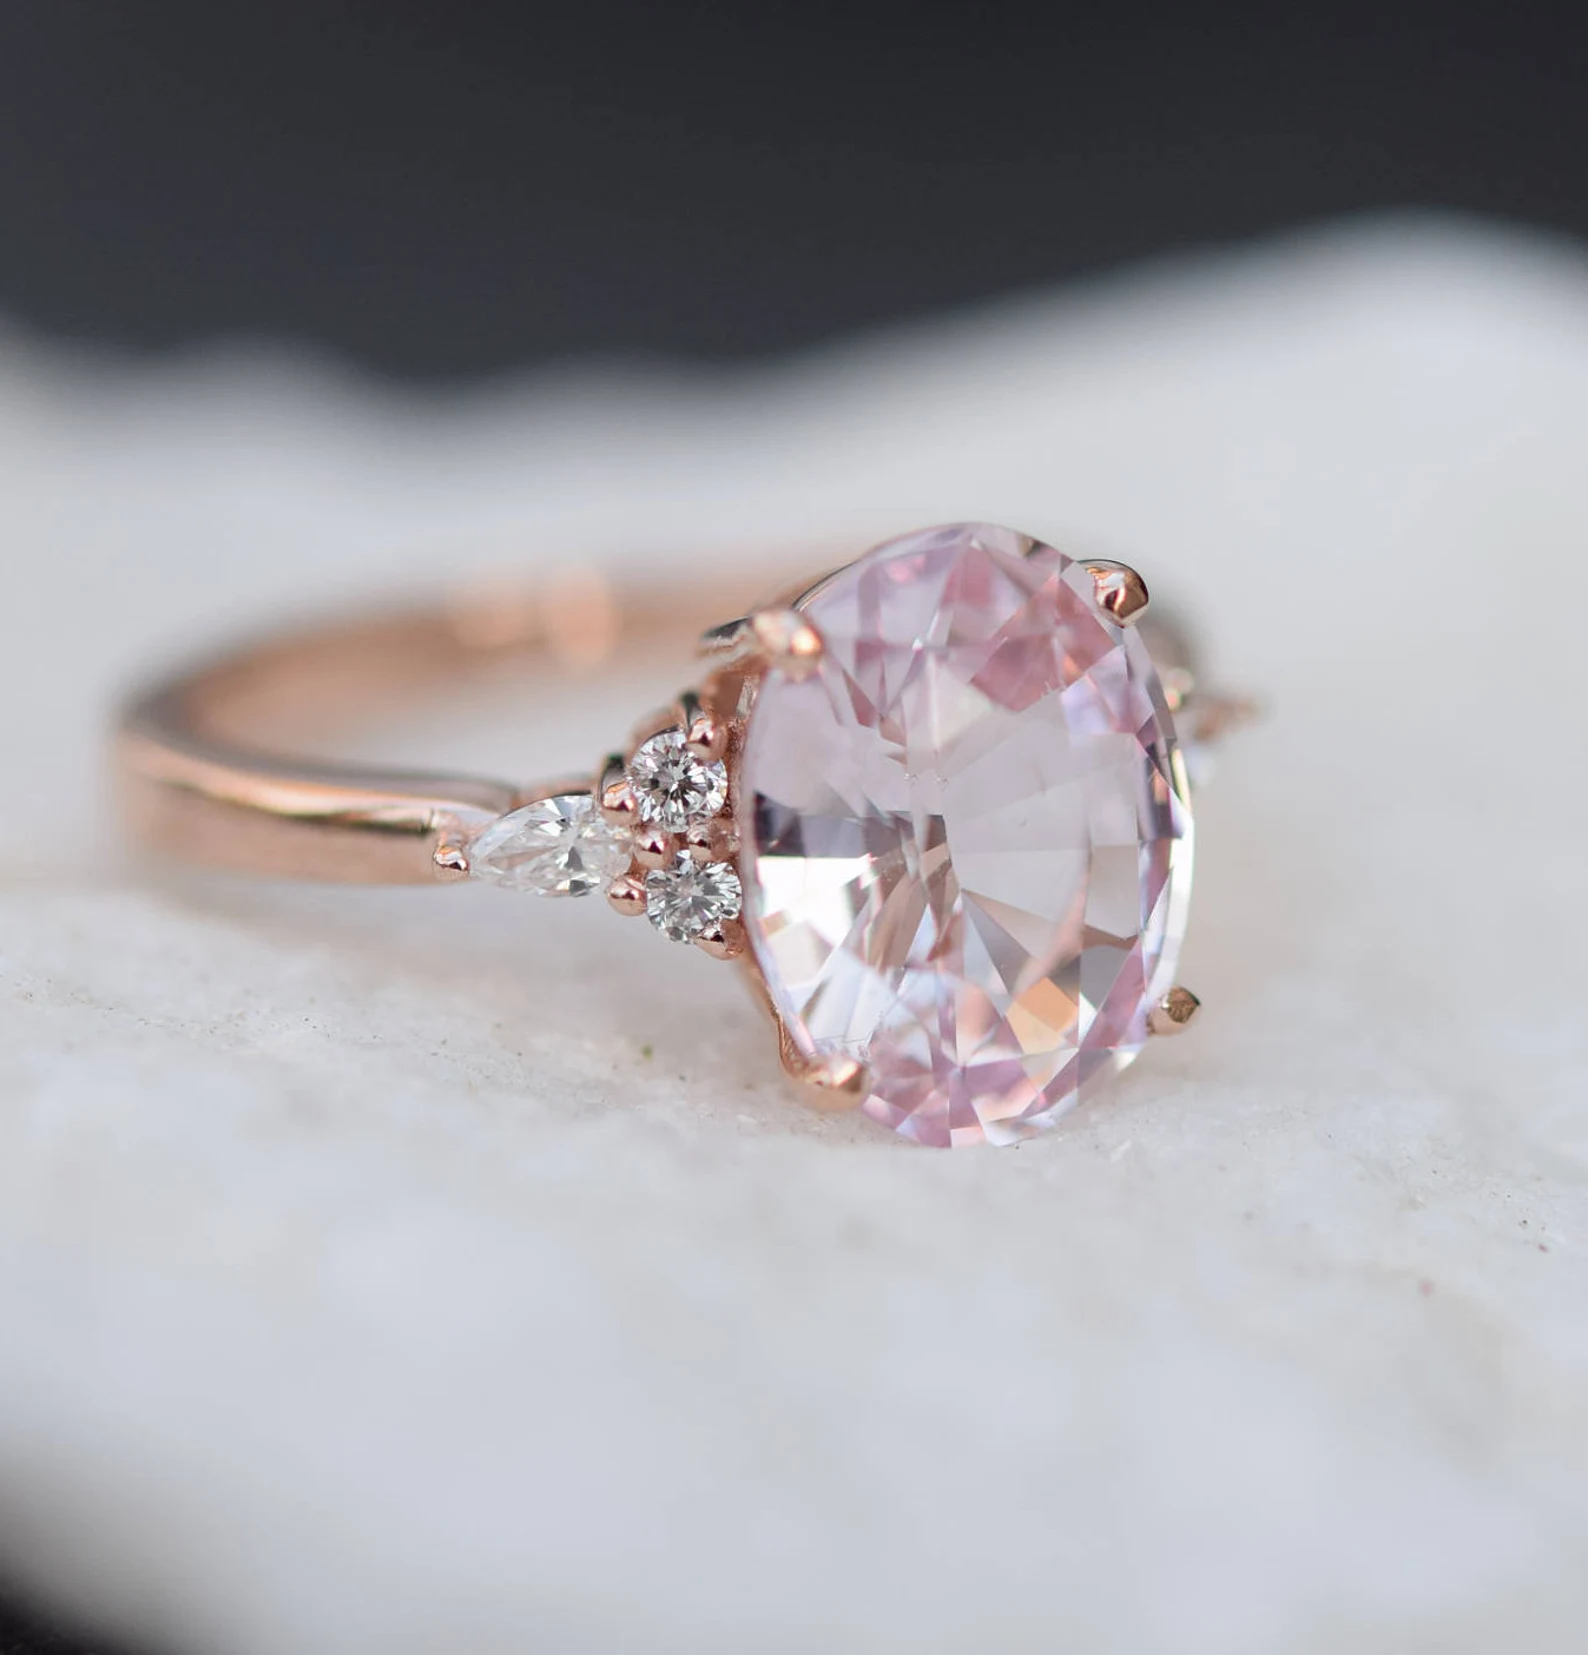 Blush sapphire oval engagement ring